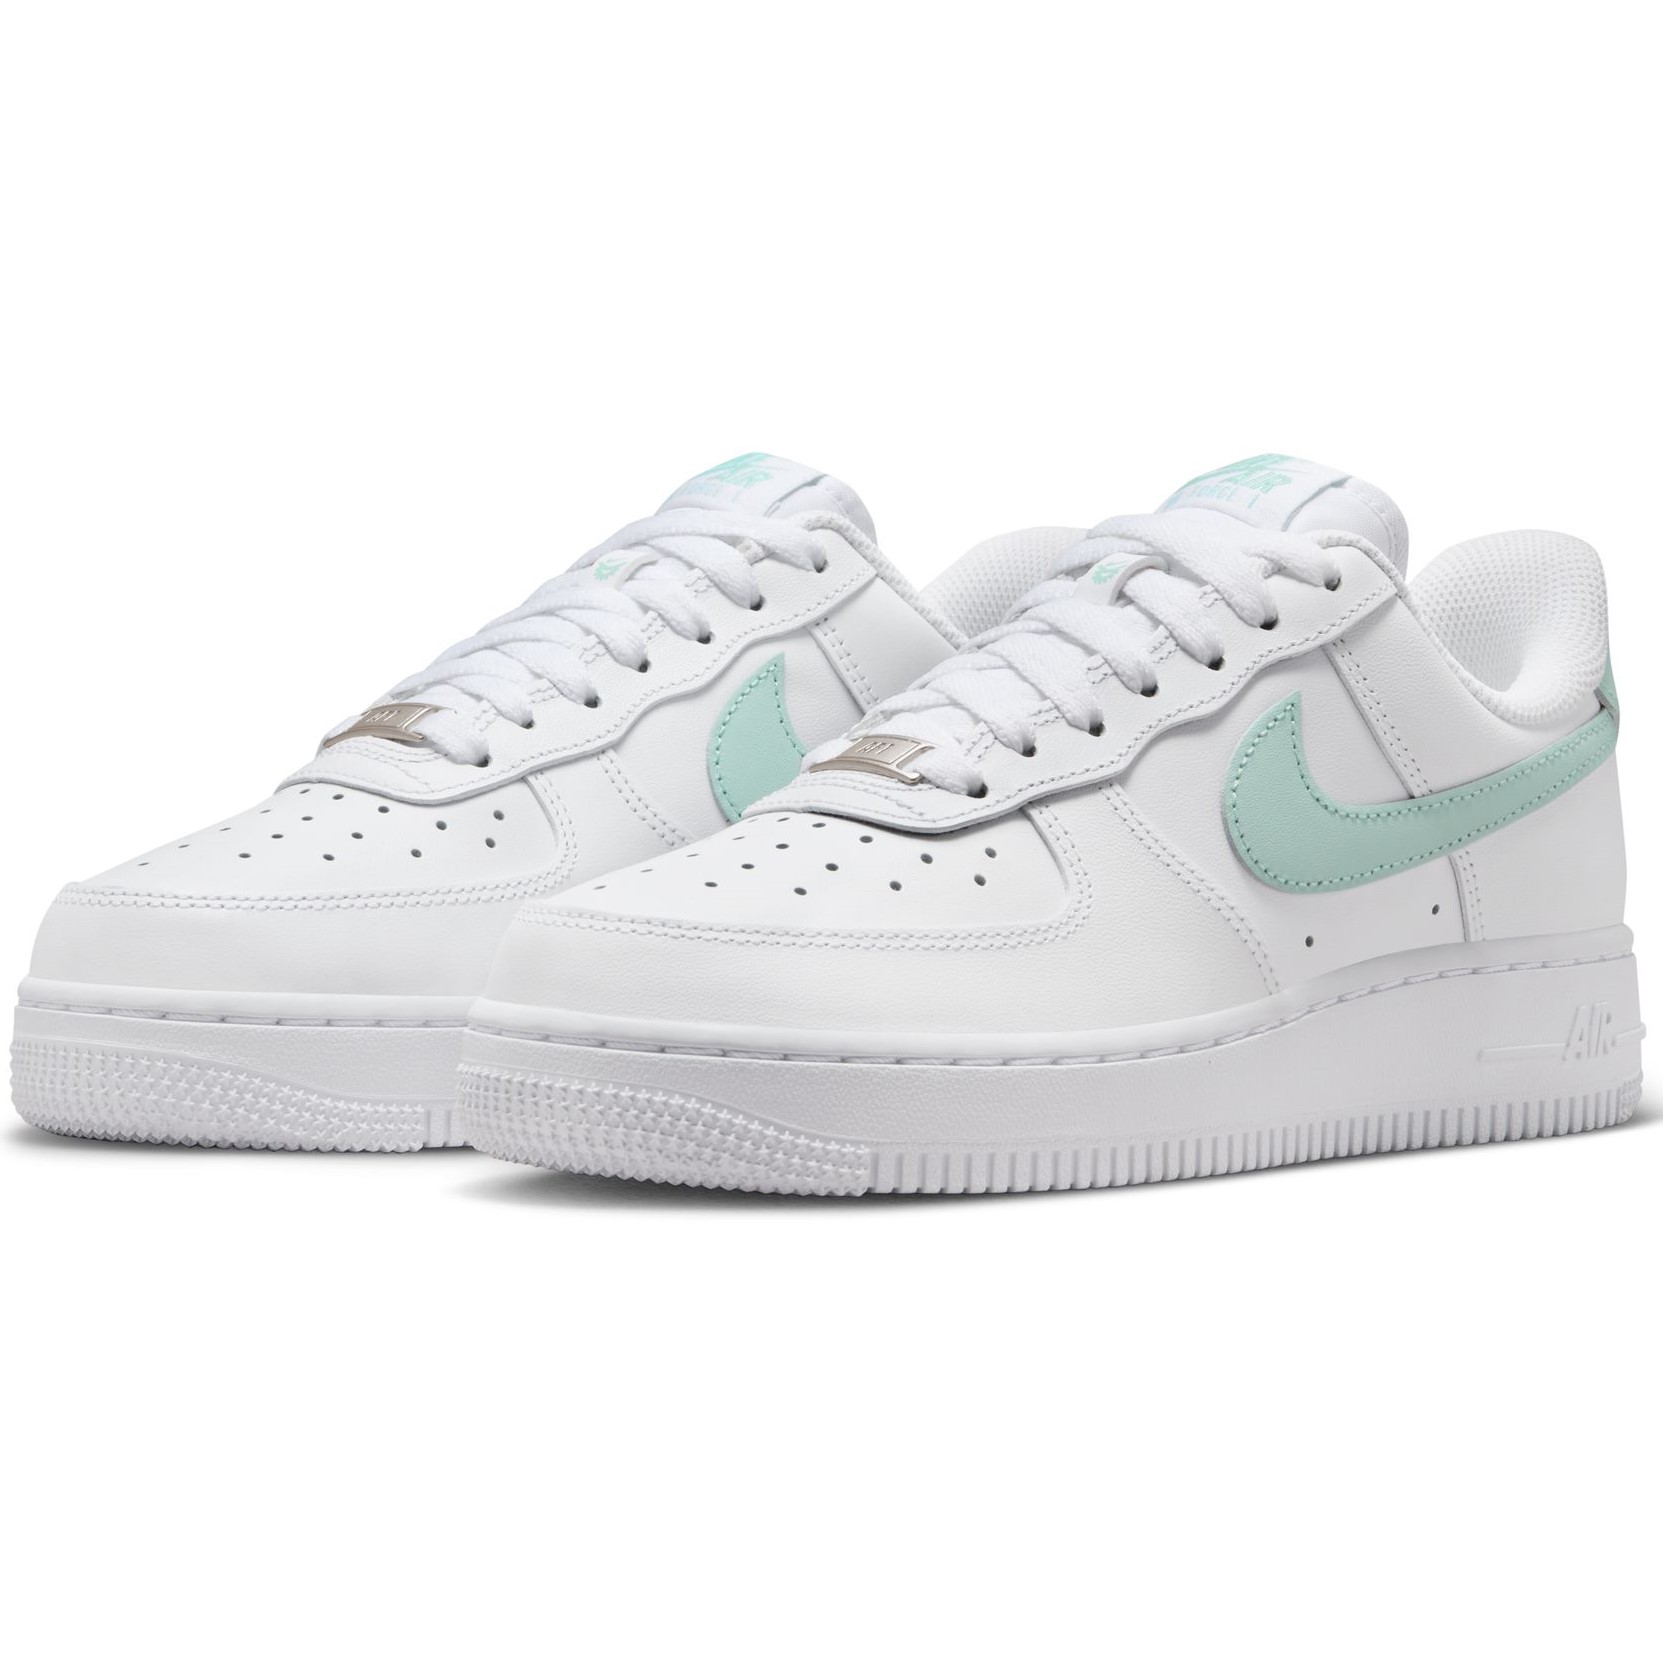 GIÀY THỂ THAO NIKE NỮ AIR FORCE 1 07 EASYON WHITE ICE JADE WOMENS SHOES DX5883-101 2